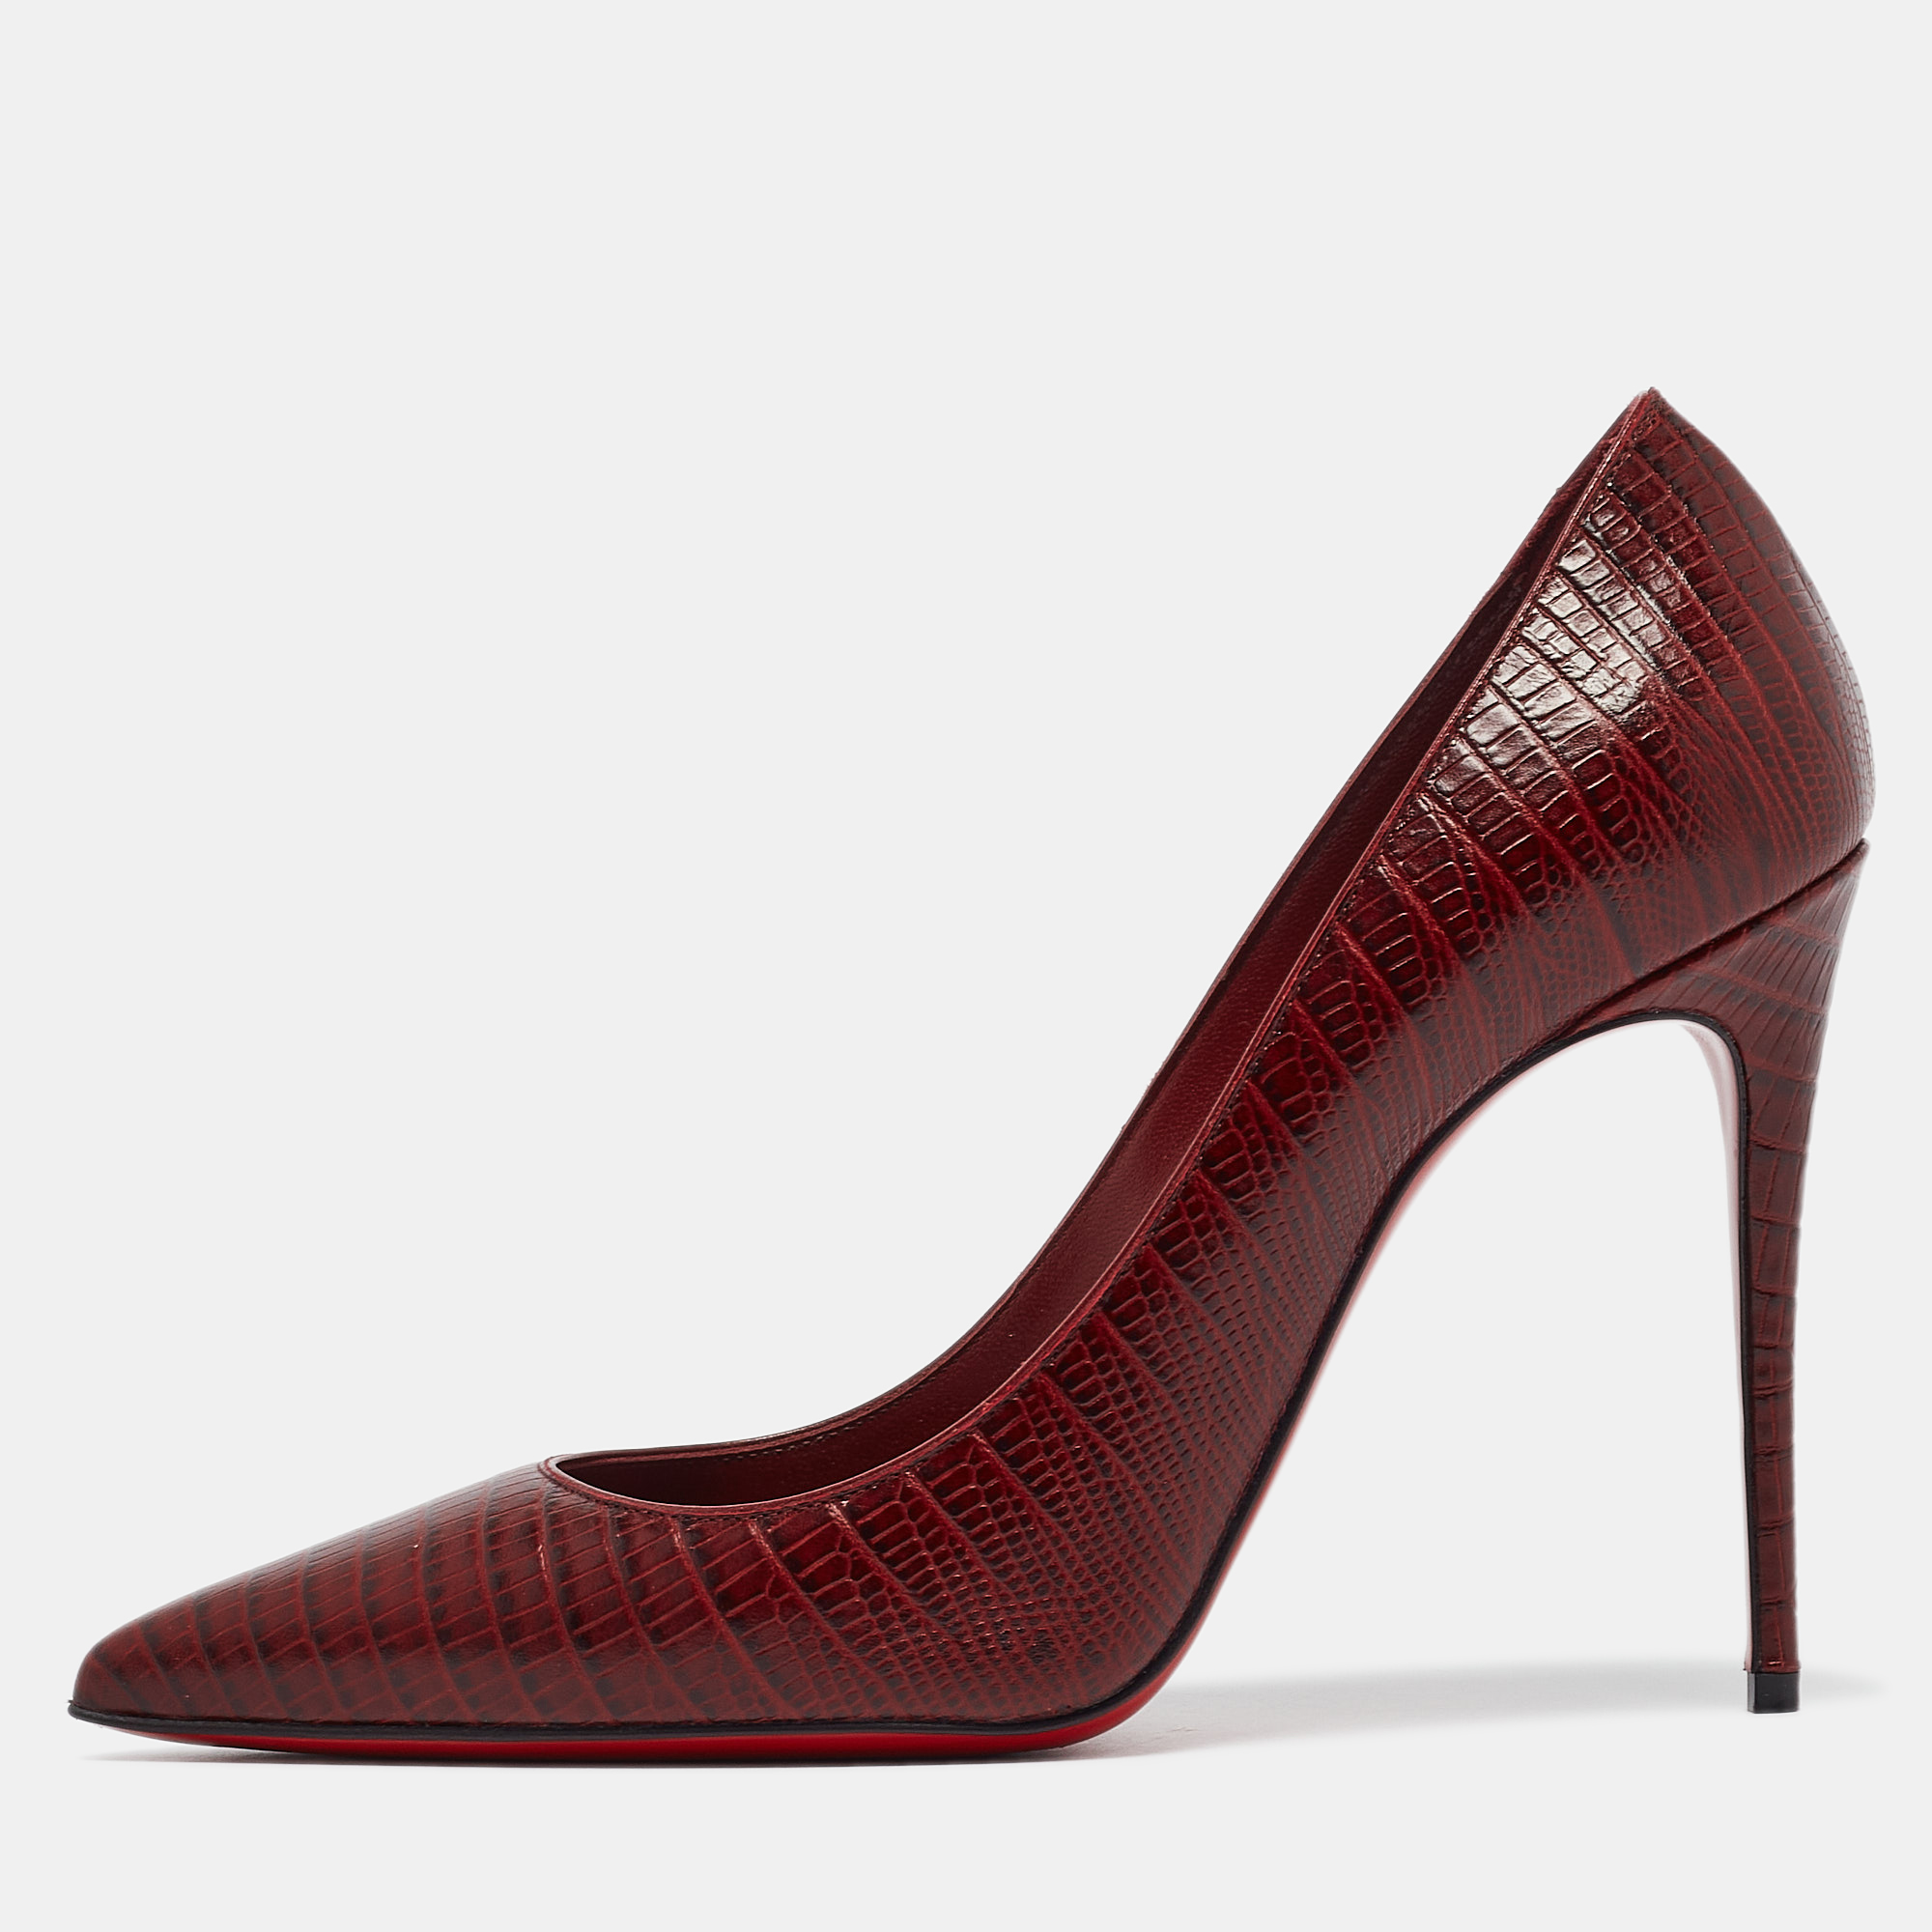 Christian louboutin dark red lizard embossed leather kate pumps size 38